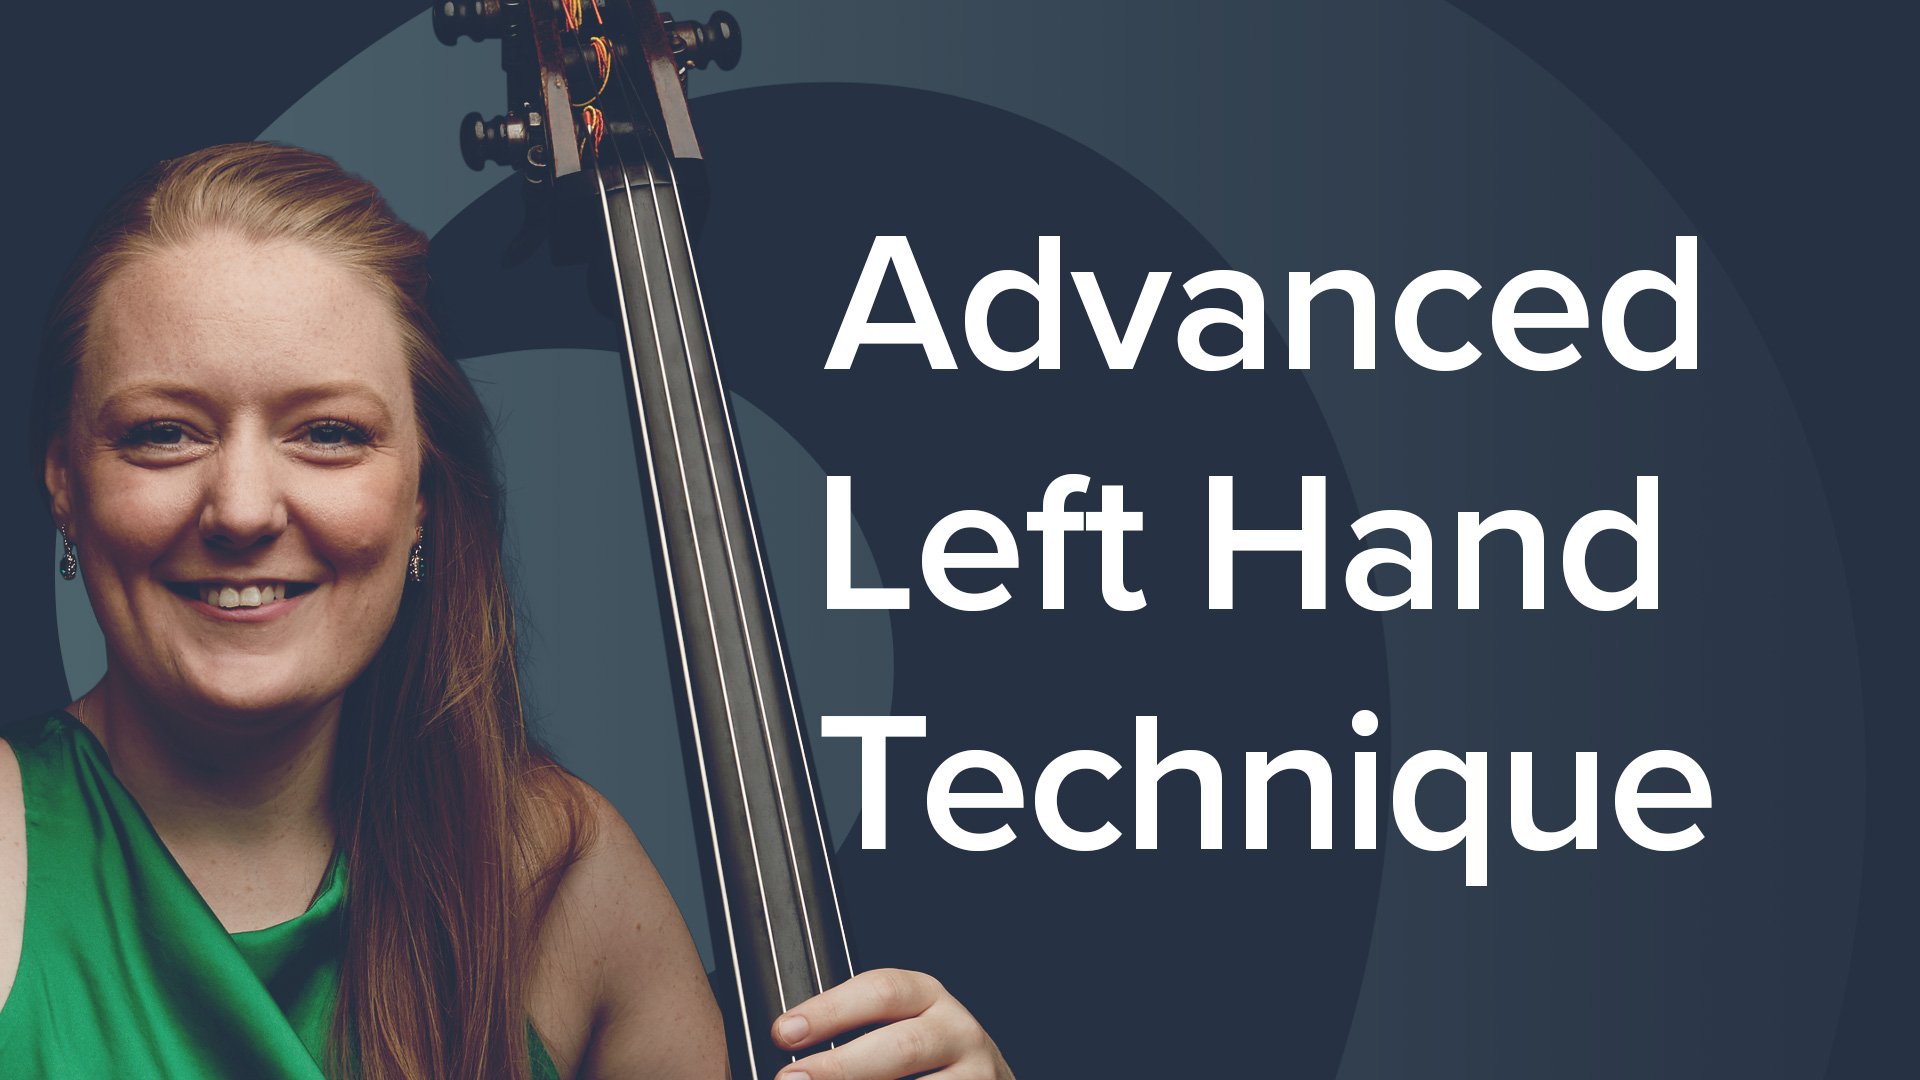 Left Hand Technique for the Advancing Bassist